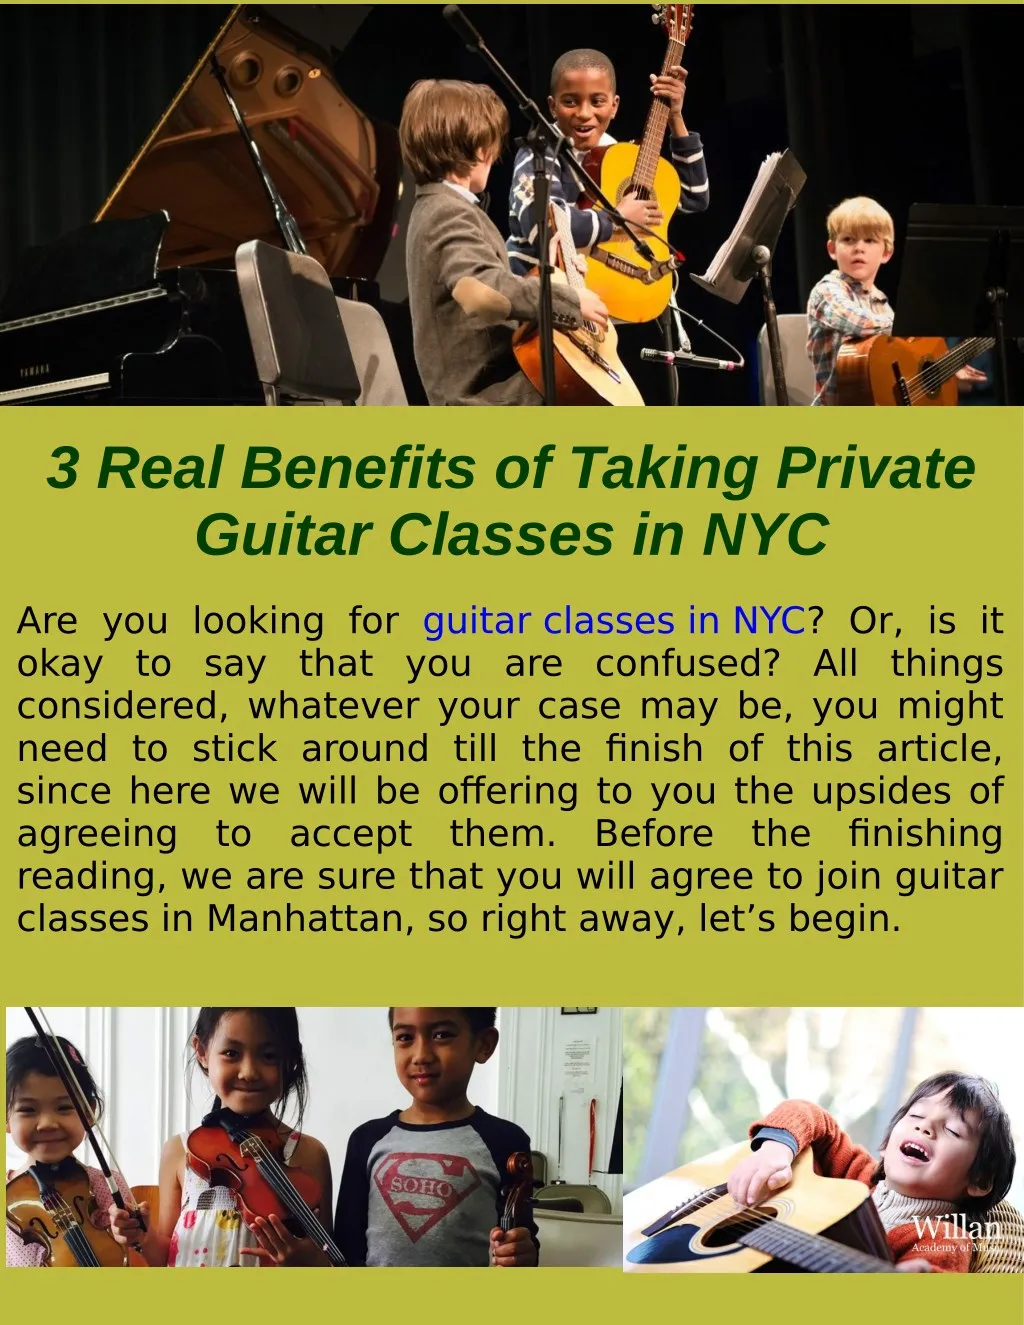 3 real benefits of taking private guitar classes